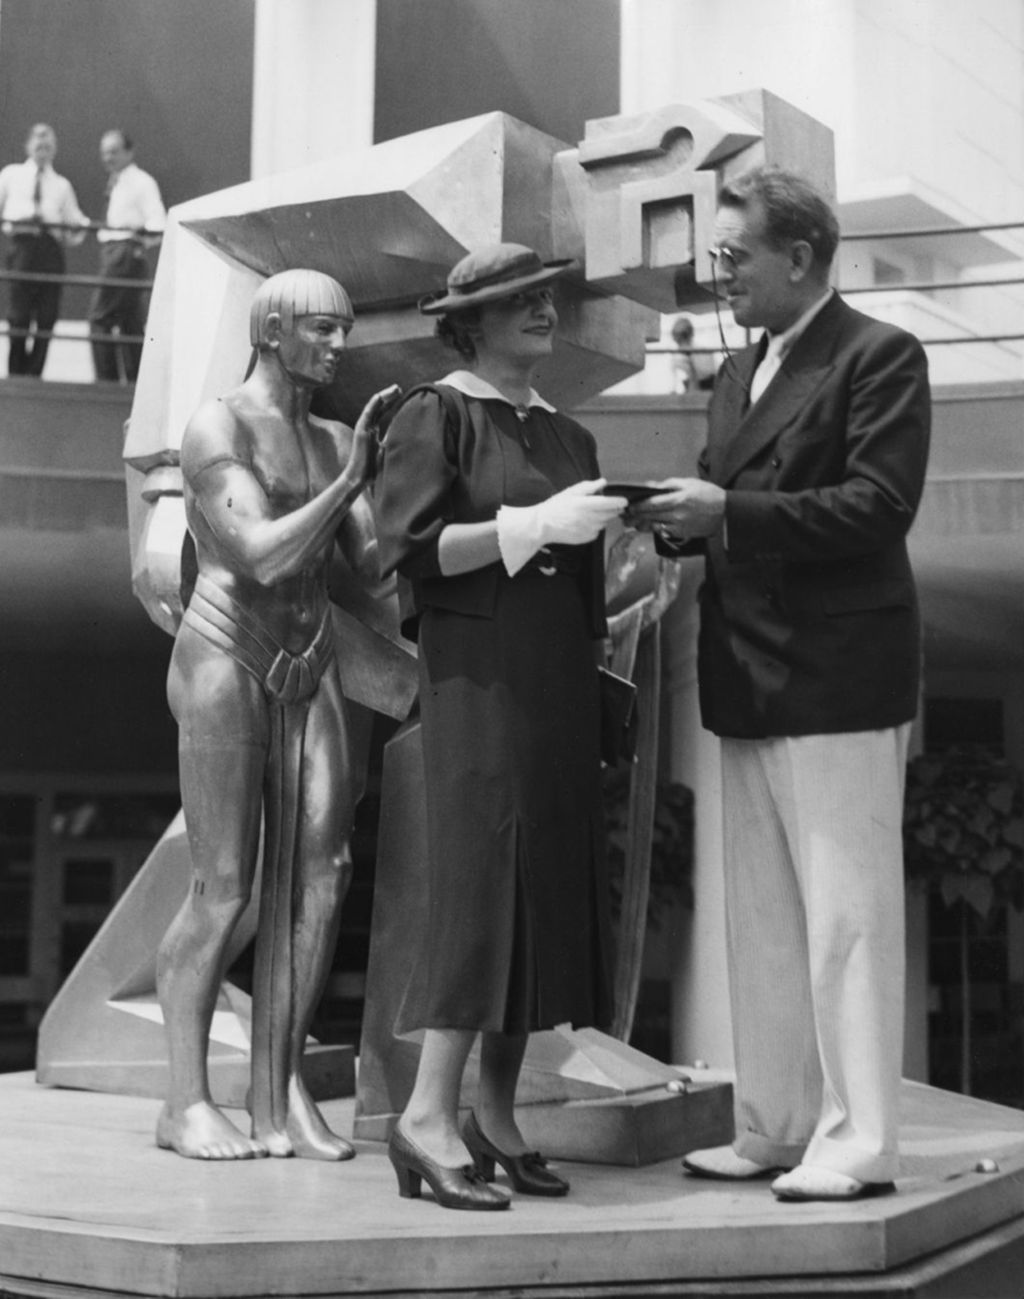 Louise Lentz Woodruff standing next to the sculpture she designed for the Fountain of Science, located in front of the main entrance to the Hall of Science.